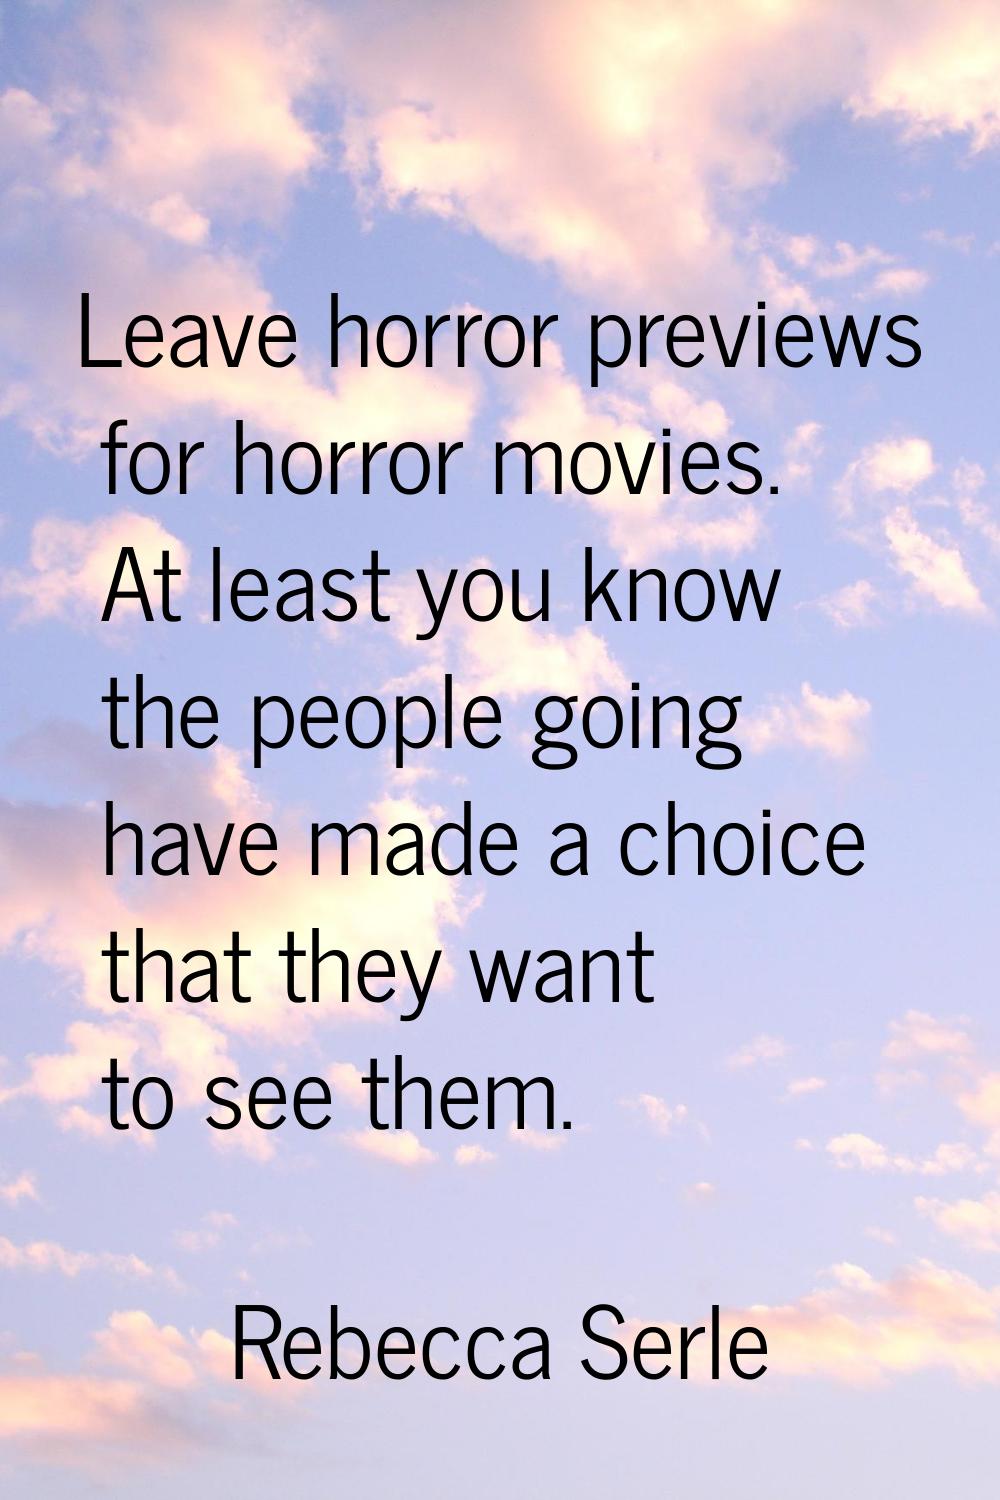 Leave horror previews for horror movies. At least you know the people going have made a choice that